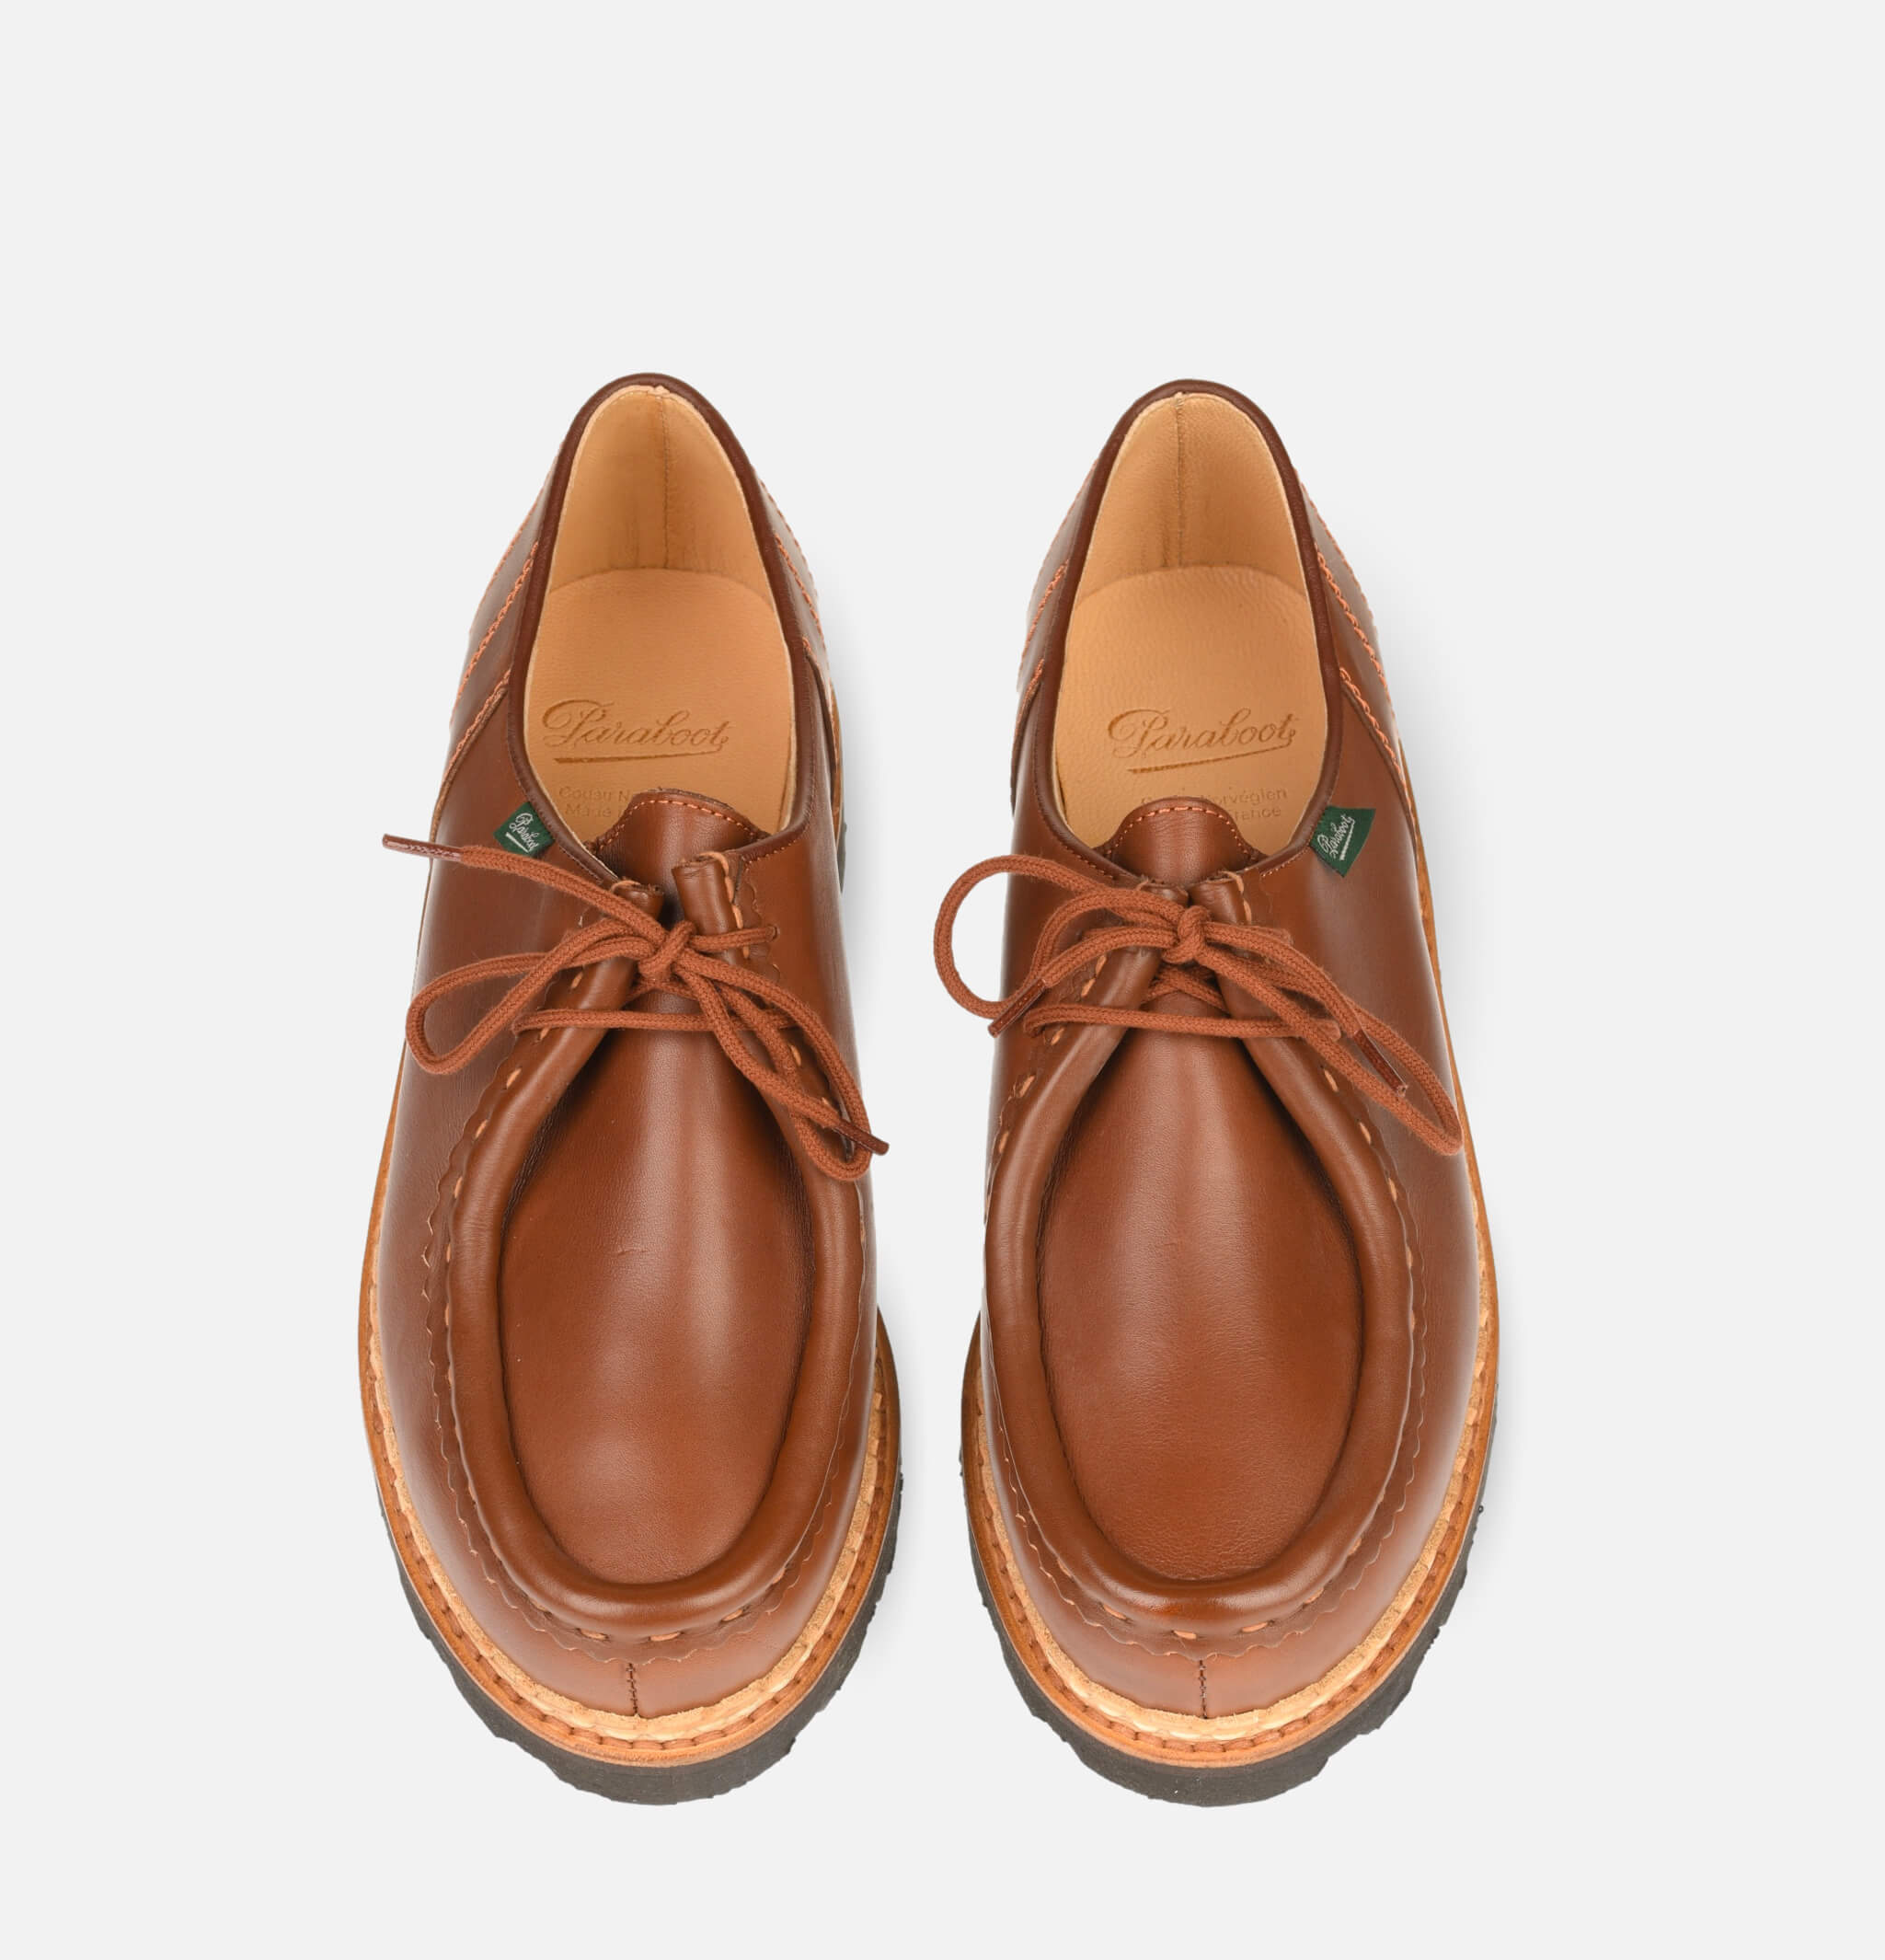 Paraboot | Shoes Morzine Brown | Royalcheese Paris - Royalcheese